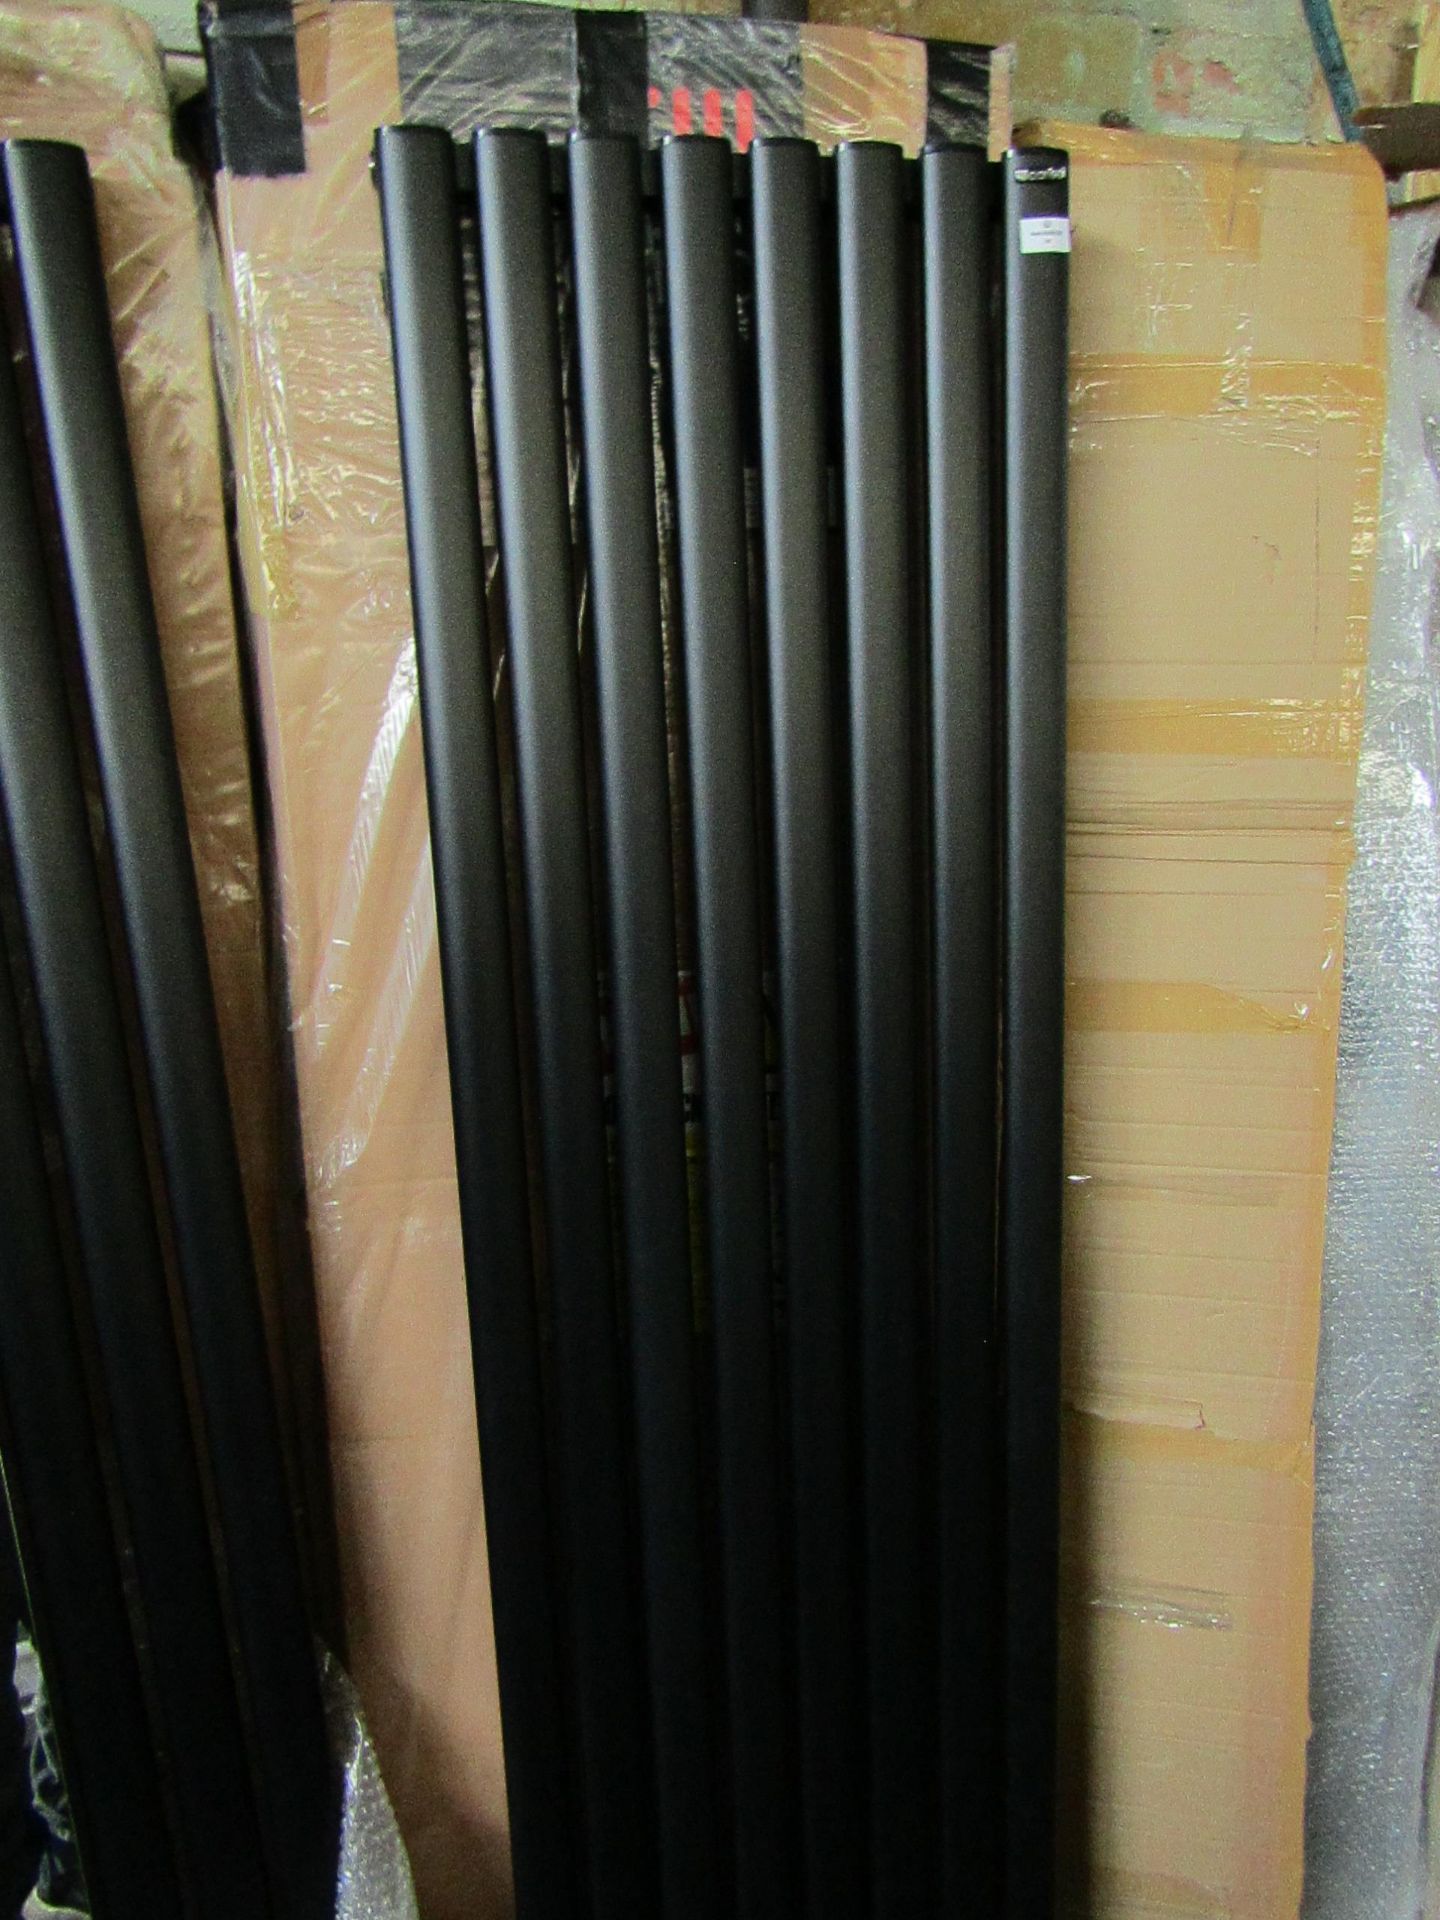 Carisa Tallis radiator, 1800x470mm, has the 3 wall brackets, appears to be in good conditionm, there